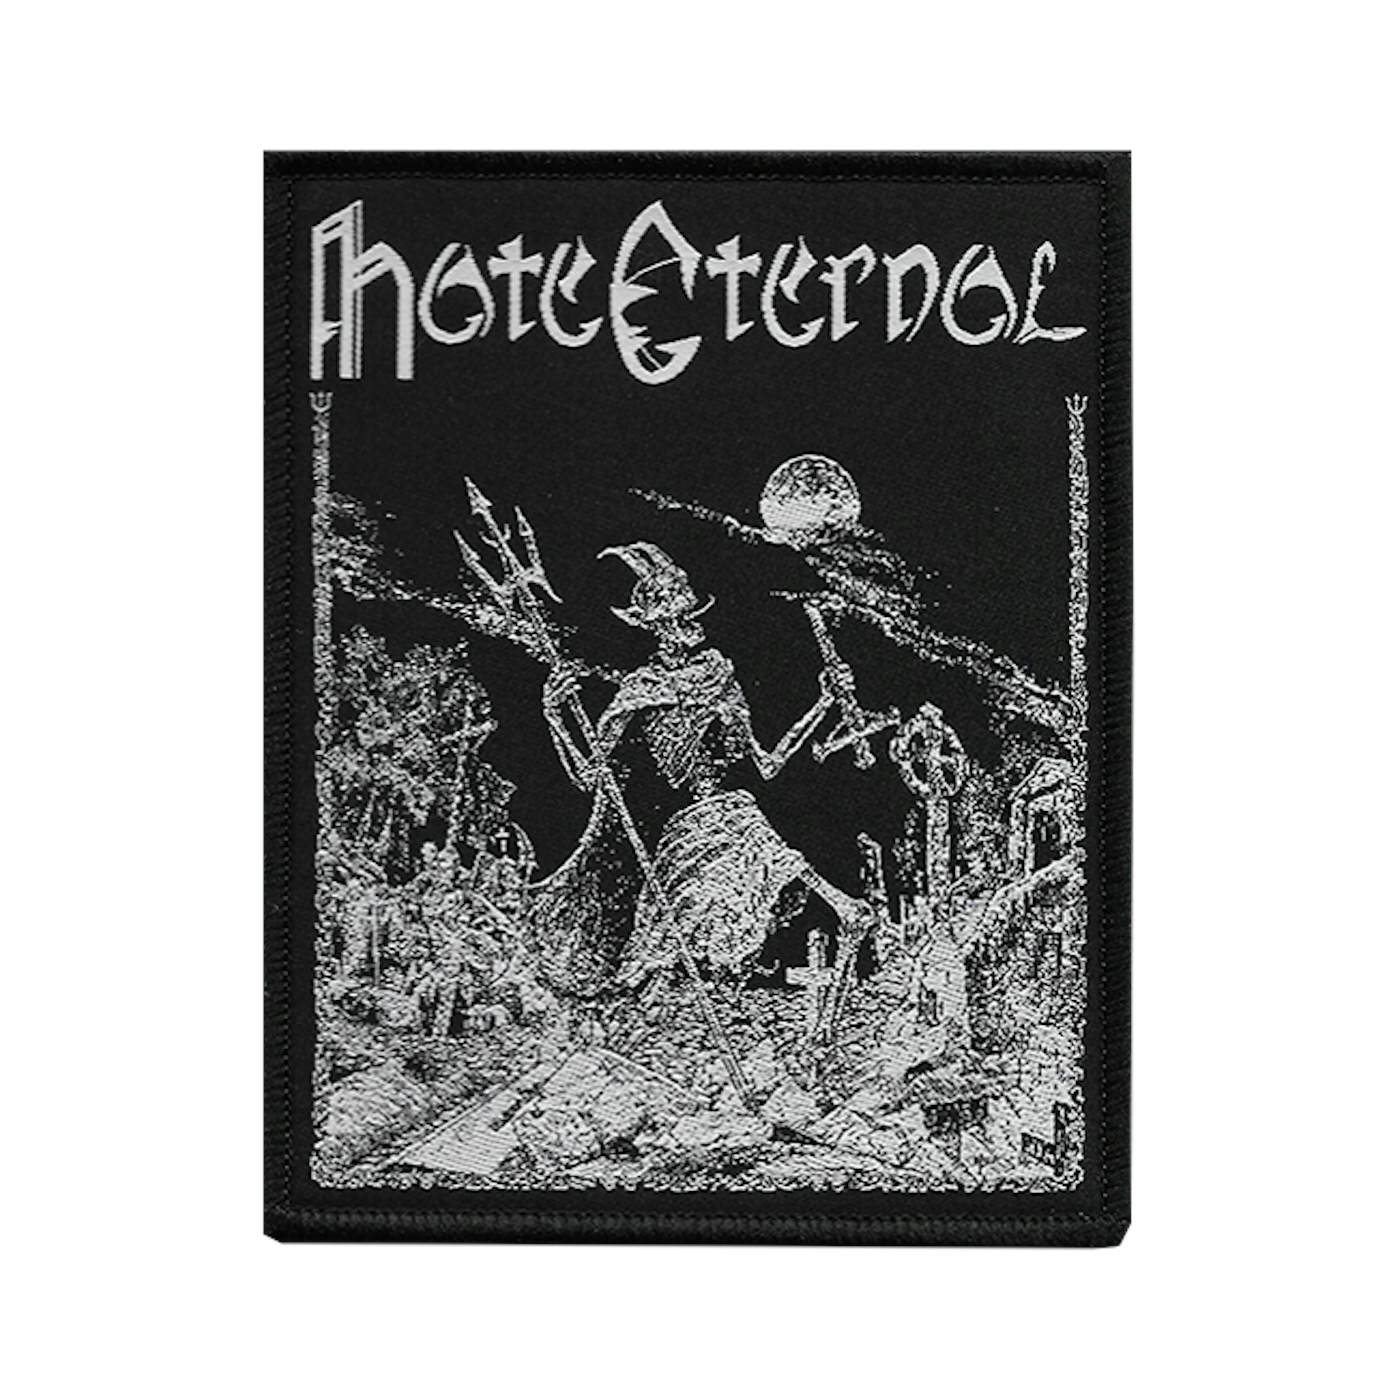 HATE ETERNAL - 'Thorncross' Patch